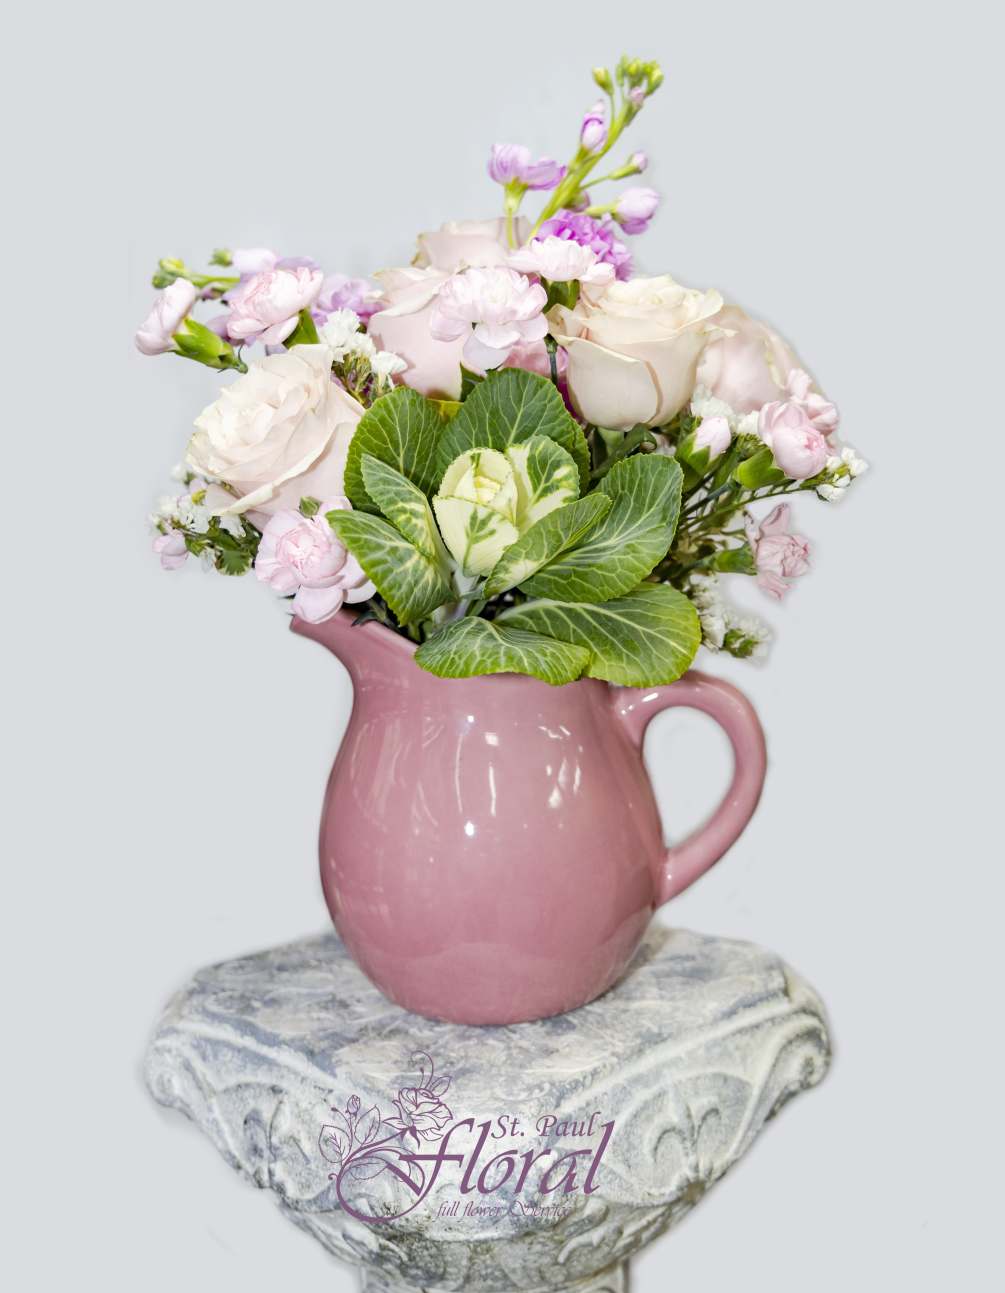 This Spring Pitcher arrangement is the perfect gift for Spring. The light